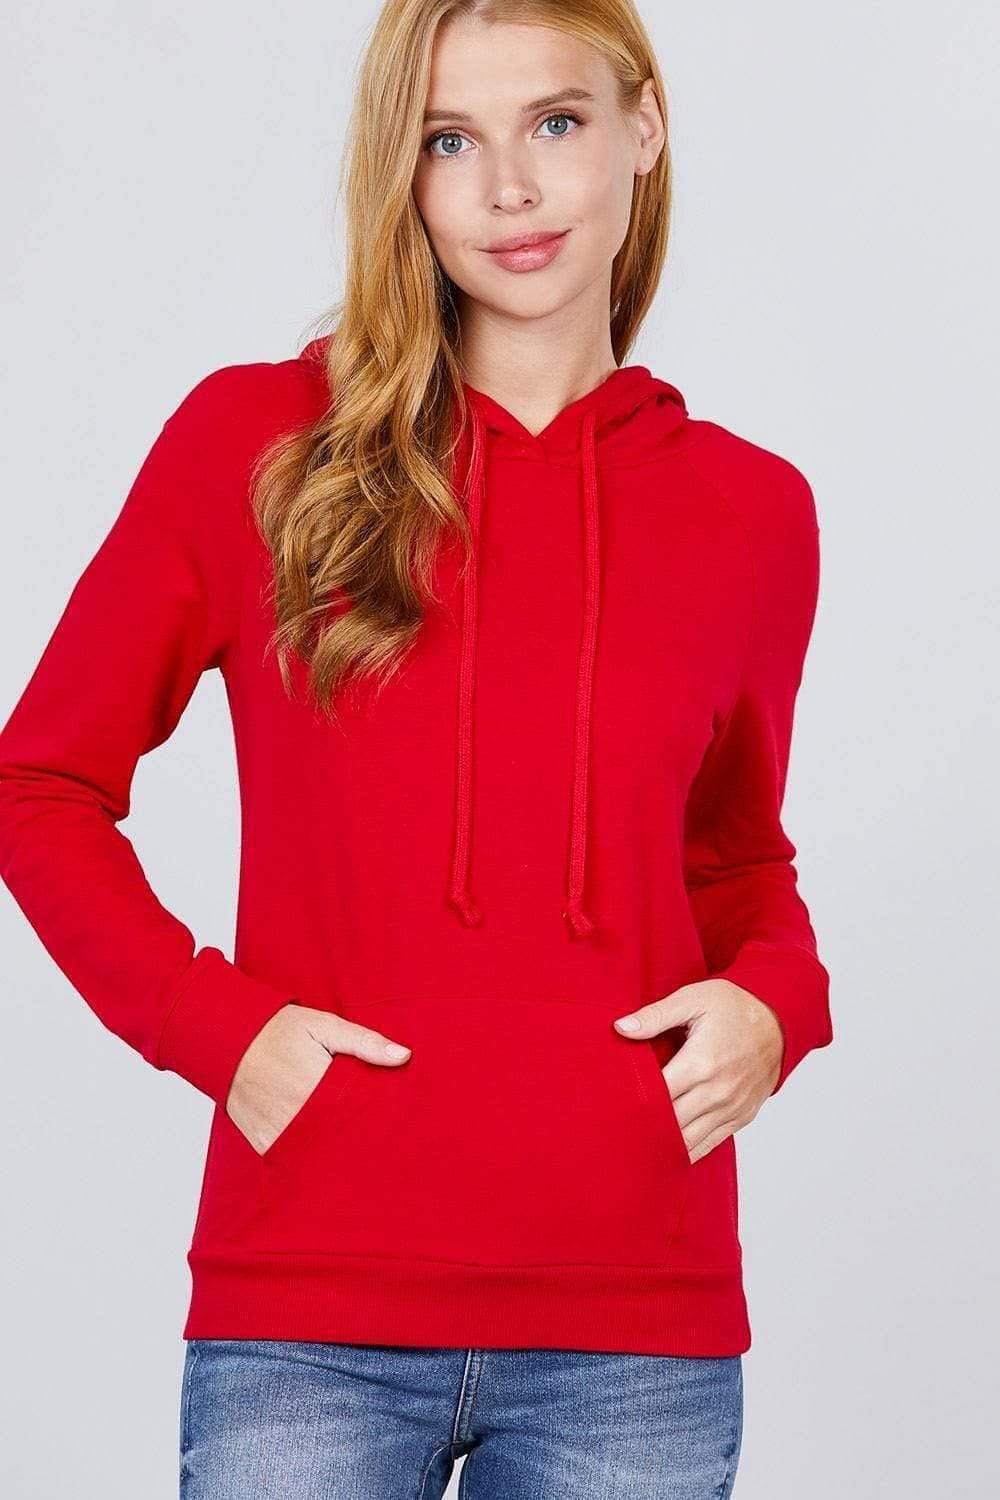 Red French Terry Long Sleeve Sweatshirt - Shopping Therapy S Sweatshirt